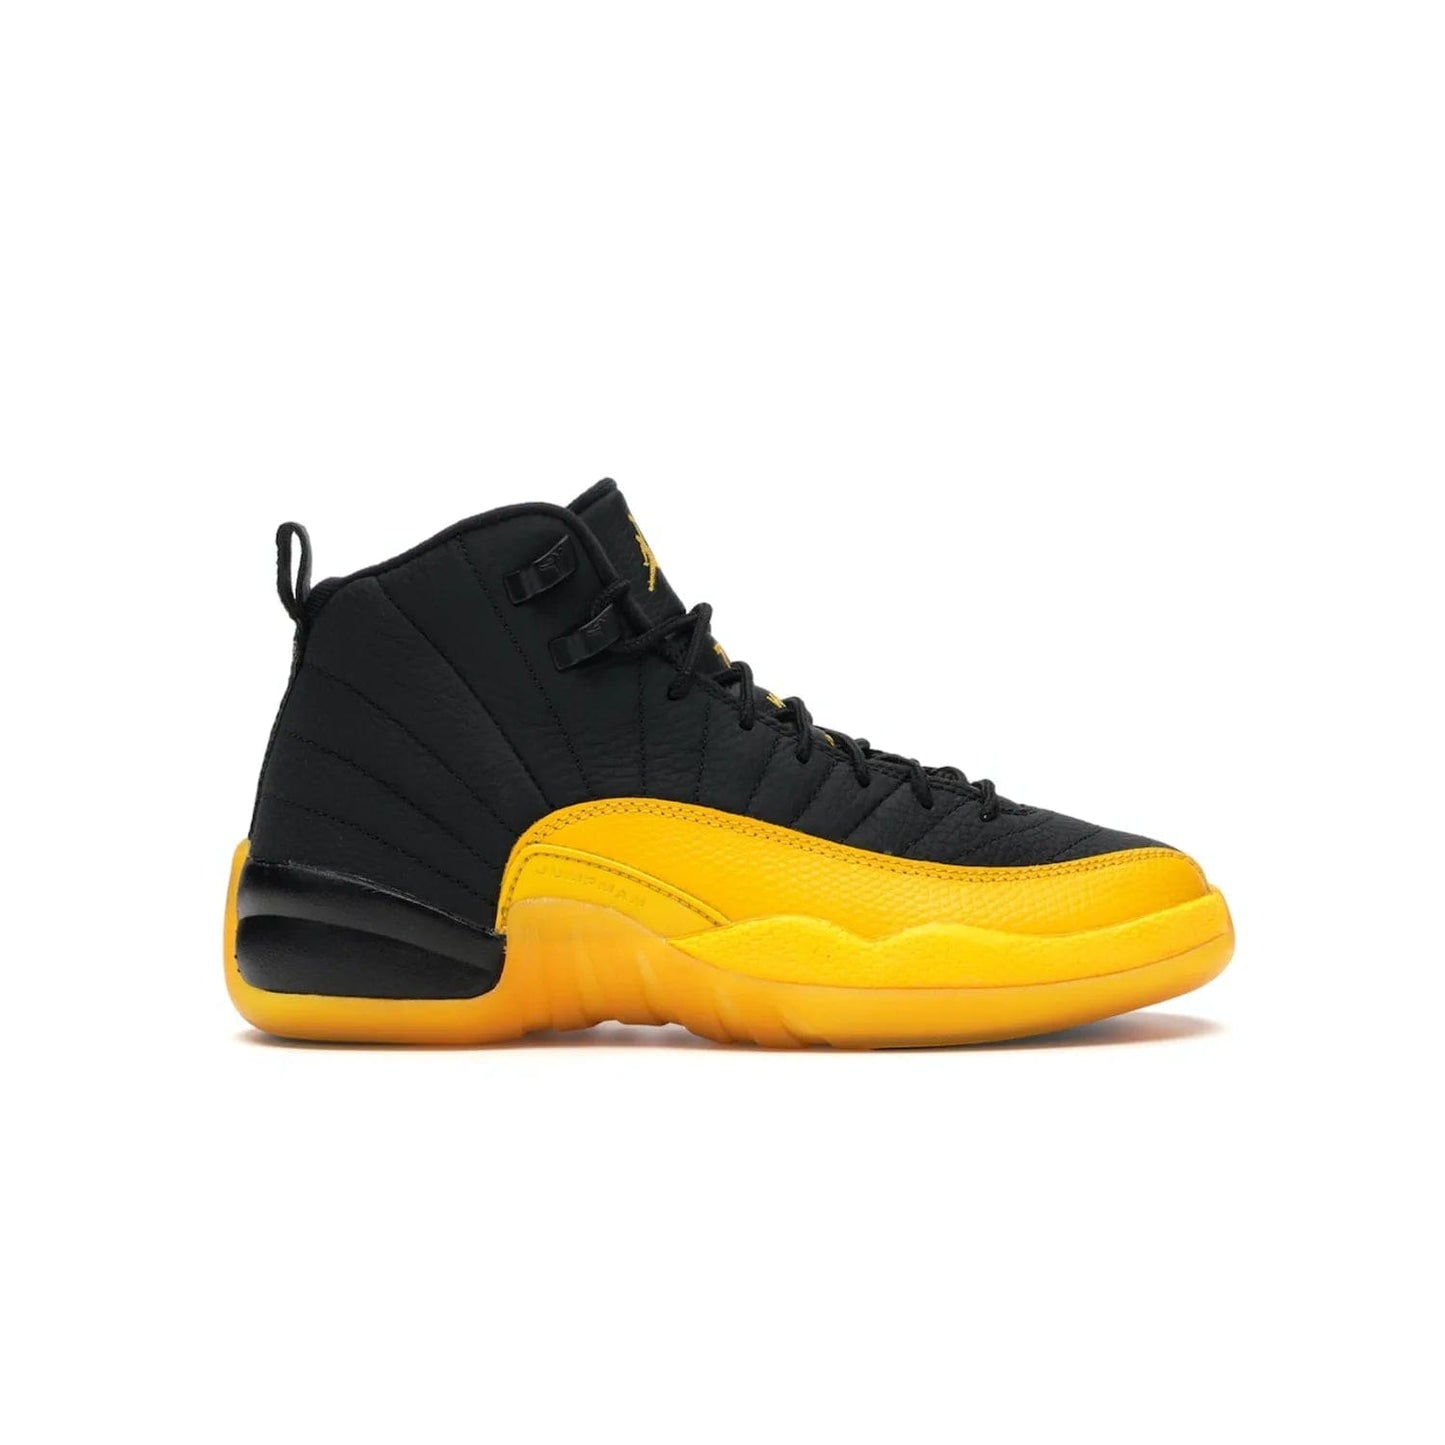 Jordan 12 Retro Black University Gold (GS) - Image 1 - Only at www.BallersClubKickz.com - Upgrade your kid's shoe collection with the Jordan 12 Retro Black University Gold. With classic style, black tumbled leather upper, and University Gold accents, it's a great summer look. Out July 2020.